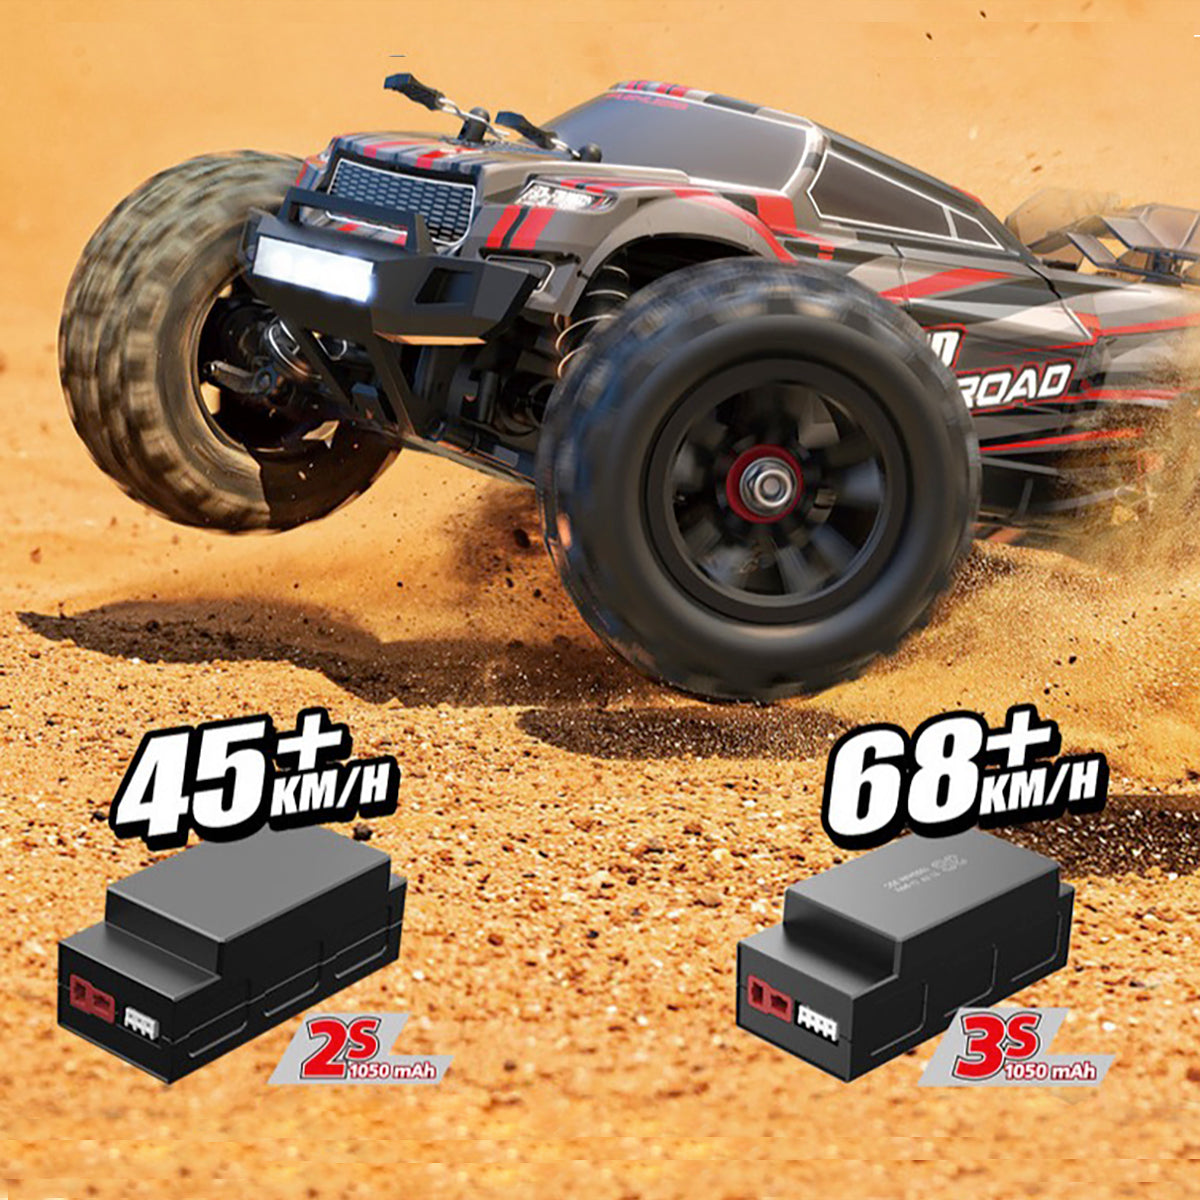 MJX16210B 1:16 RTR Brushless Fast Adult RC Car, Max Speed 42mph Hobby Electric Off-Road Jumping RC Truck, RC Monster Truck Oil-Filled Shock Absorbing RC Car